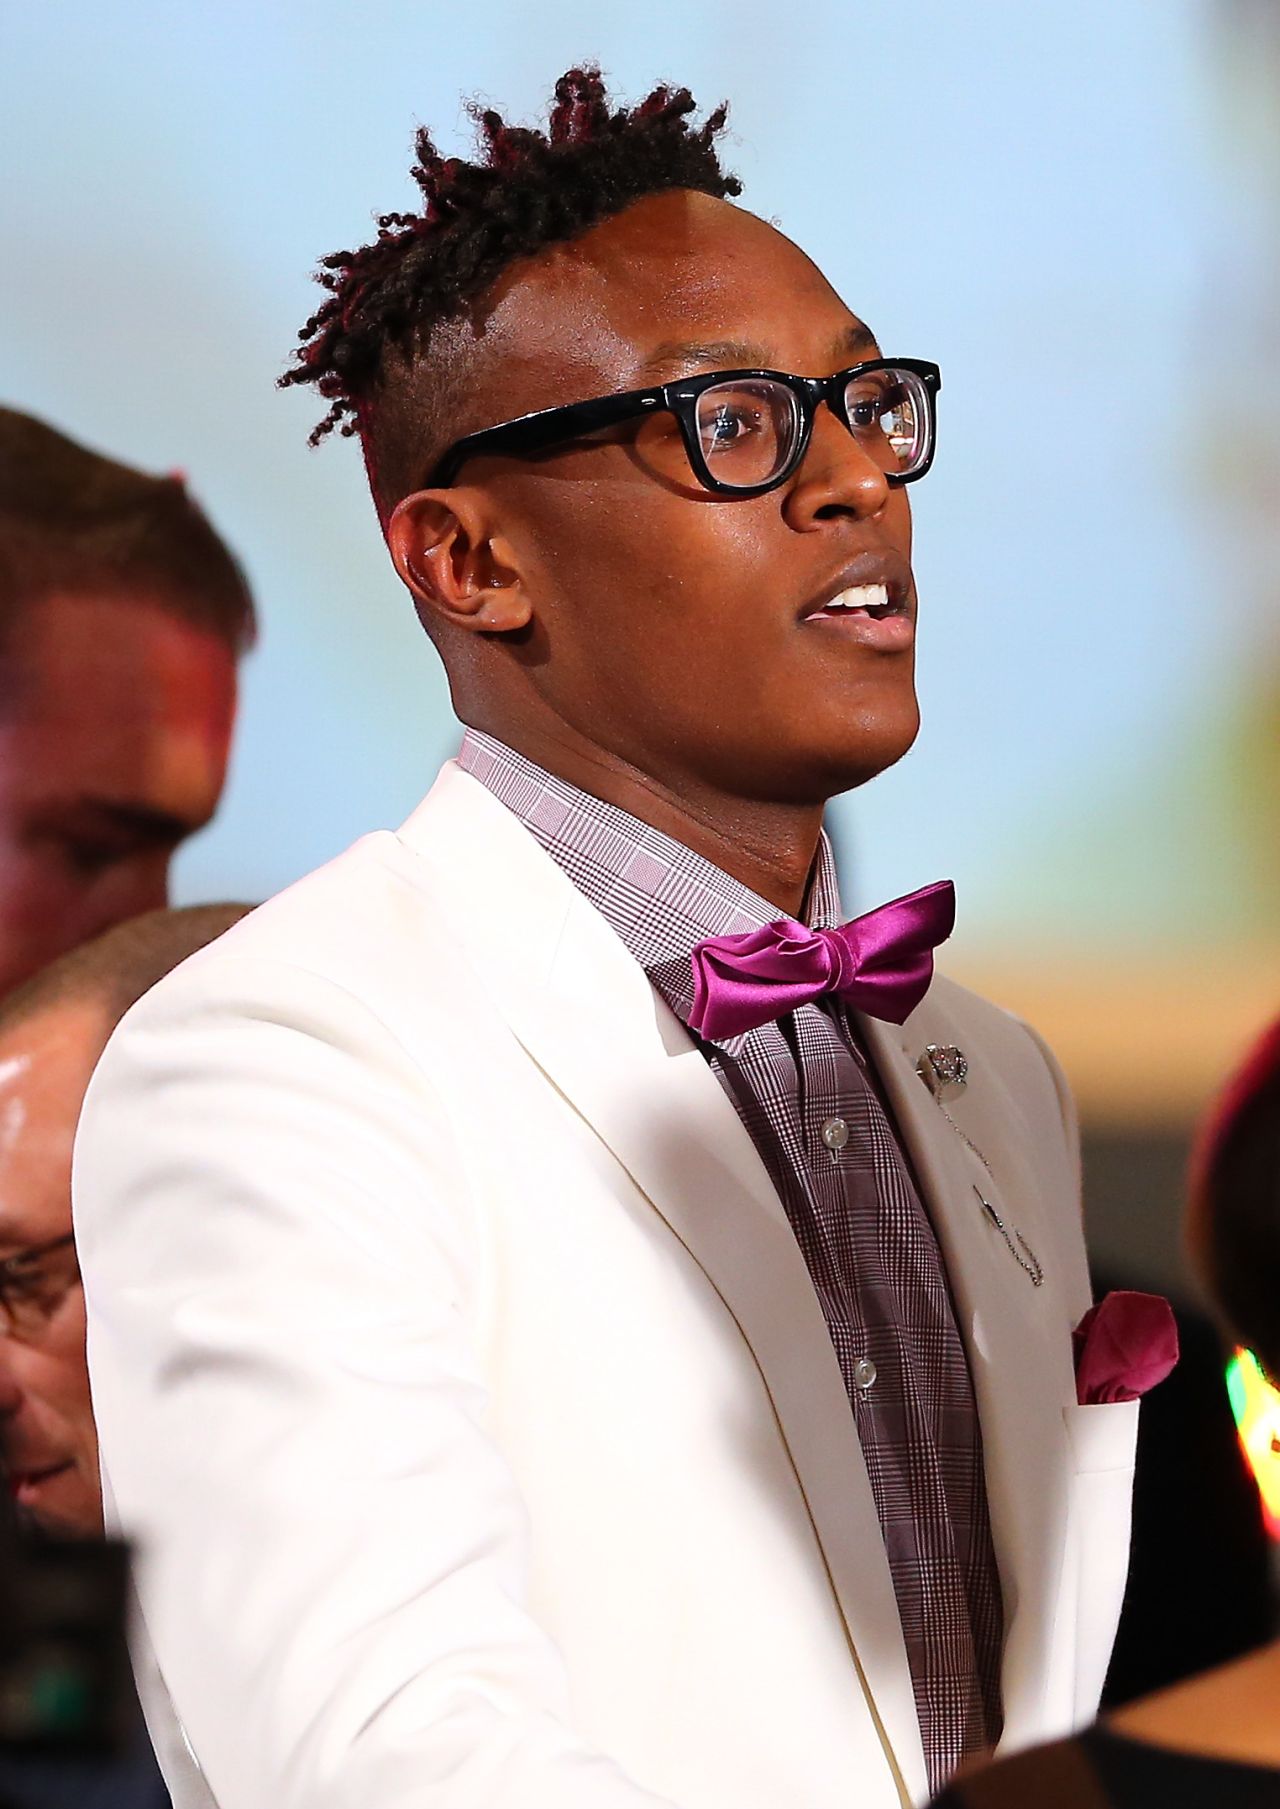 Incoming rookies have turned the NBA Draft into a runway show. Bow-tied Myles Turner reacts after being selected 11th overall by the Indiana Pacers in the first round of the 2015 draft on June 25 in Brooklyn, New York. 